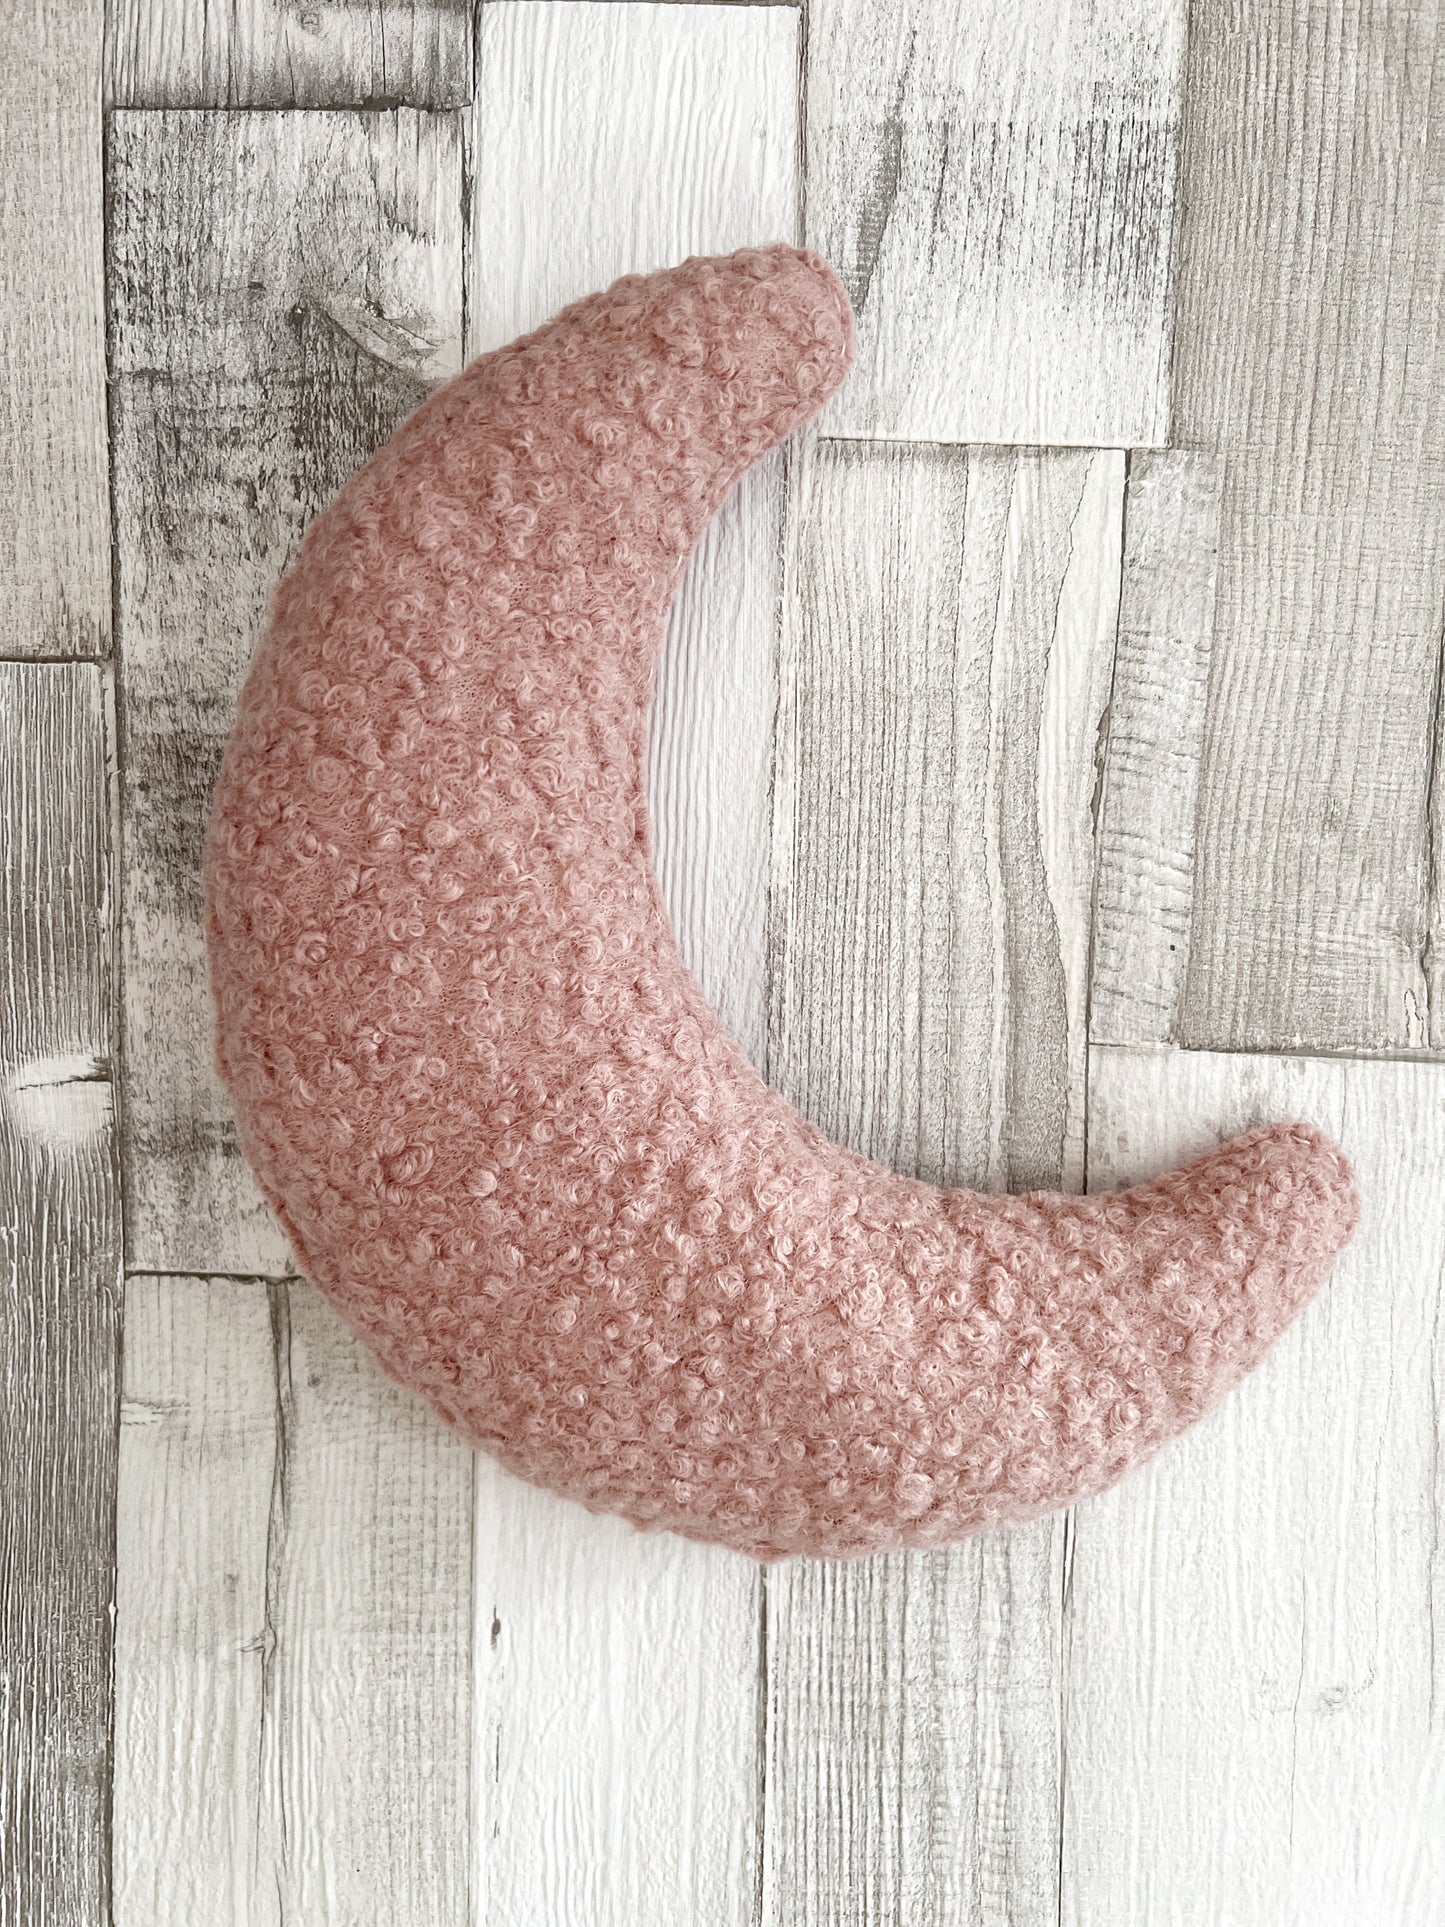 Bouclé Moon Wall Decoration - READY TO POST